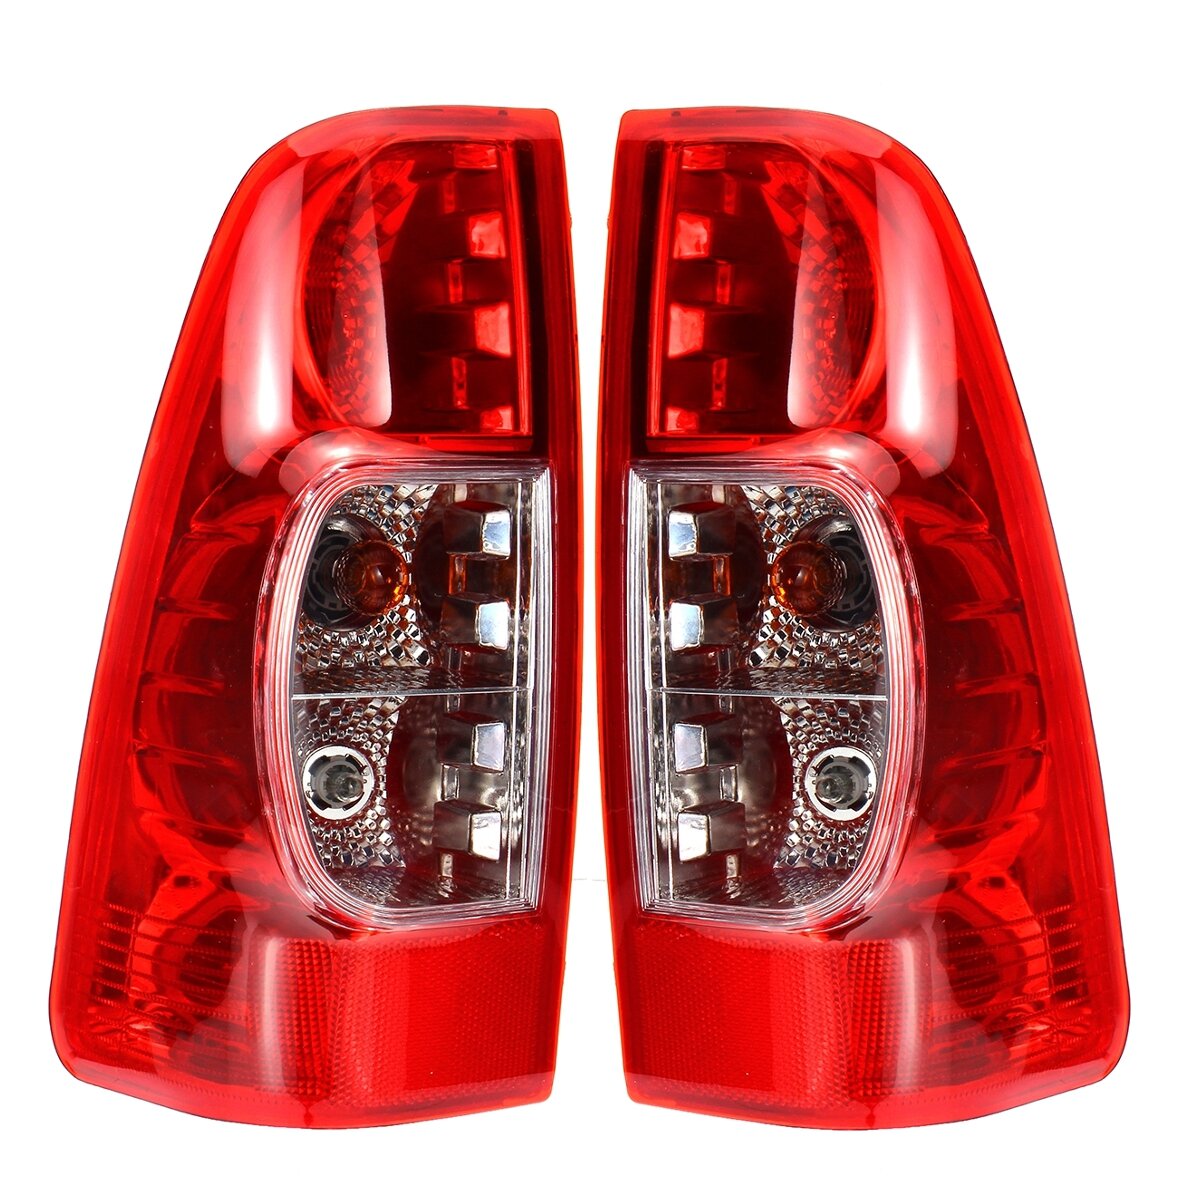 Car Rear Tail Lamp Brake Light Assembly Left Right For Isuzu Rodeo / DMax Pickup 2007 - 2012